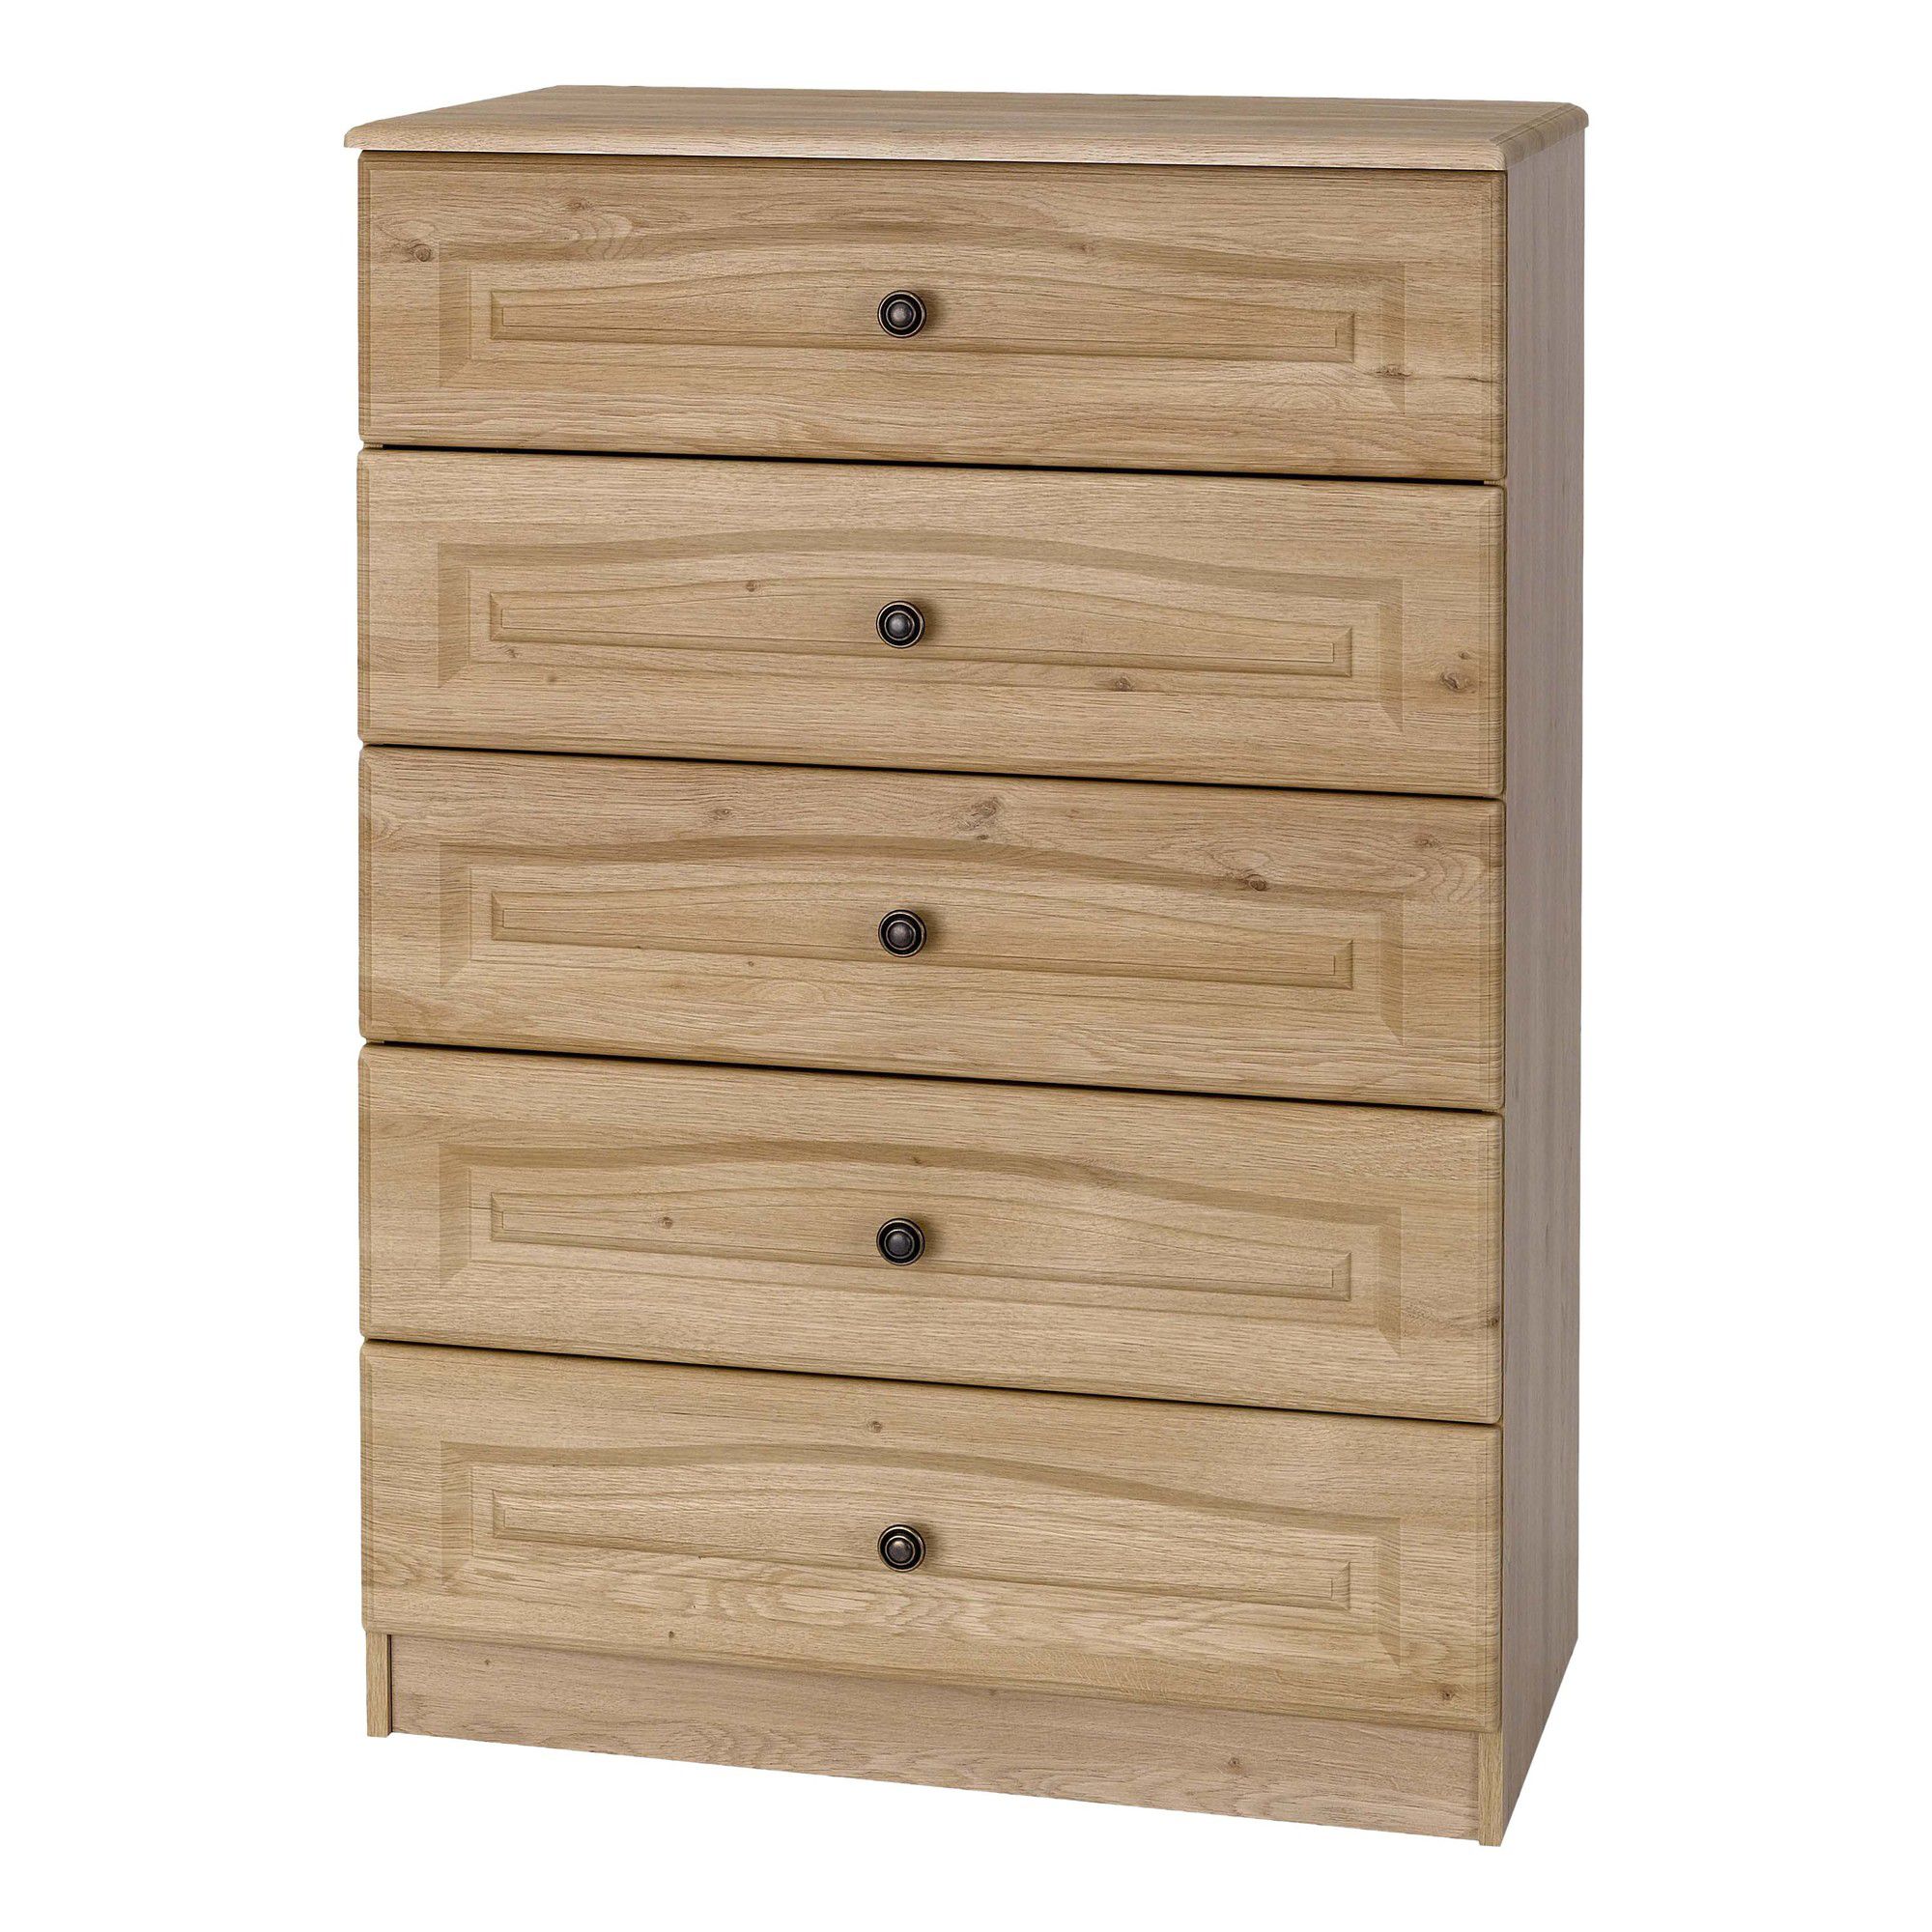 Alto Furniture Visualise Bordeaux Five Drawer Chest in Oak at Tesco Direct